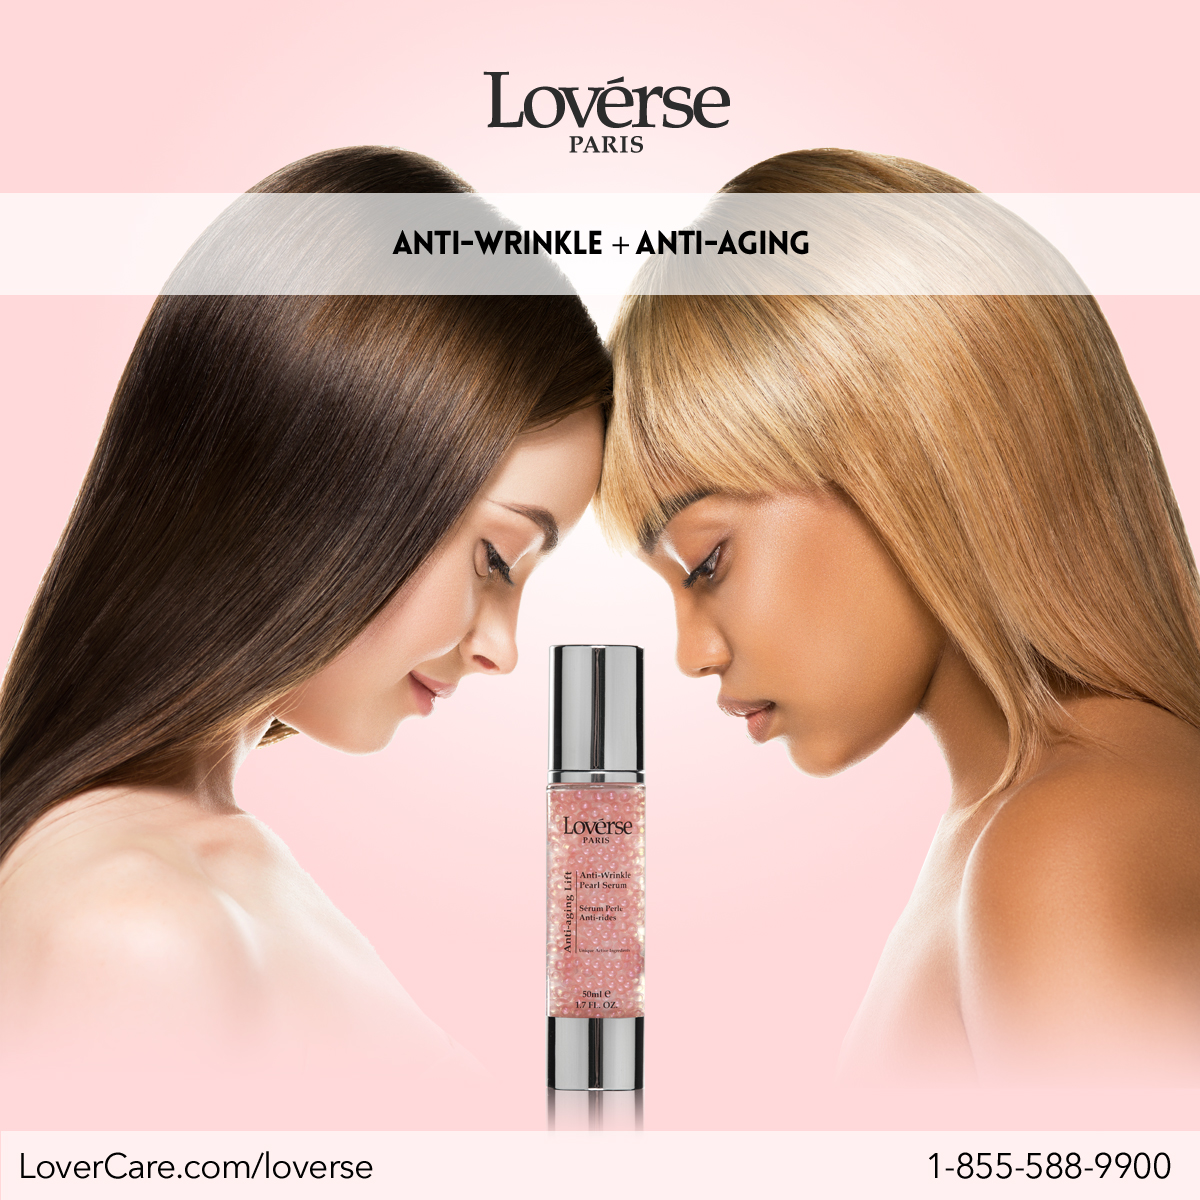 Discover the beauty secret from PARIS🗼 Lovérse Anti-Wrinkle Pearl Serum is a high-performing anti-aging serum with Gatuline In-Tense that helps reduce damage caused by pollution and stress and can help prevent future damage. bit.ly/3H9QHJH #antiaging #loverse #paris